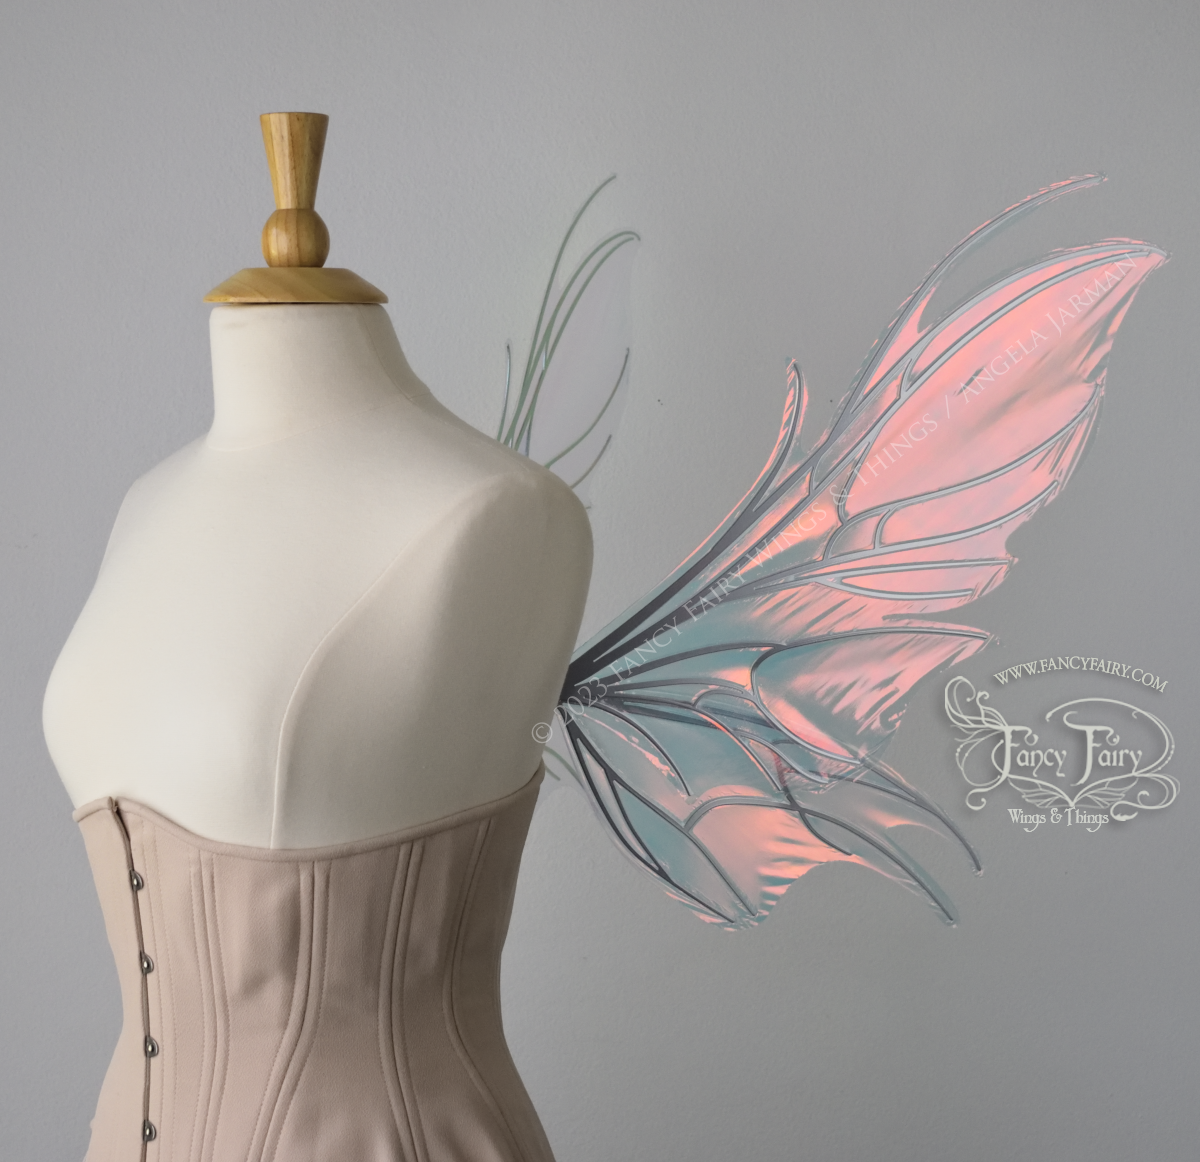 Right side view of iridescent pink / orange fairy wings with spikey silver veins, worn by a dress form